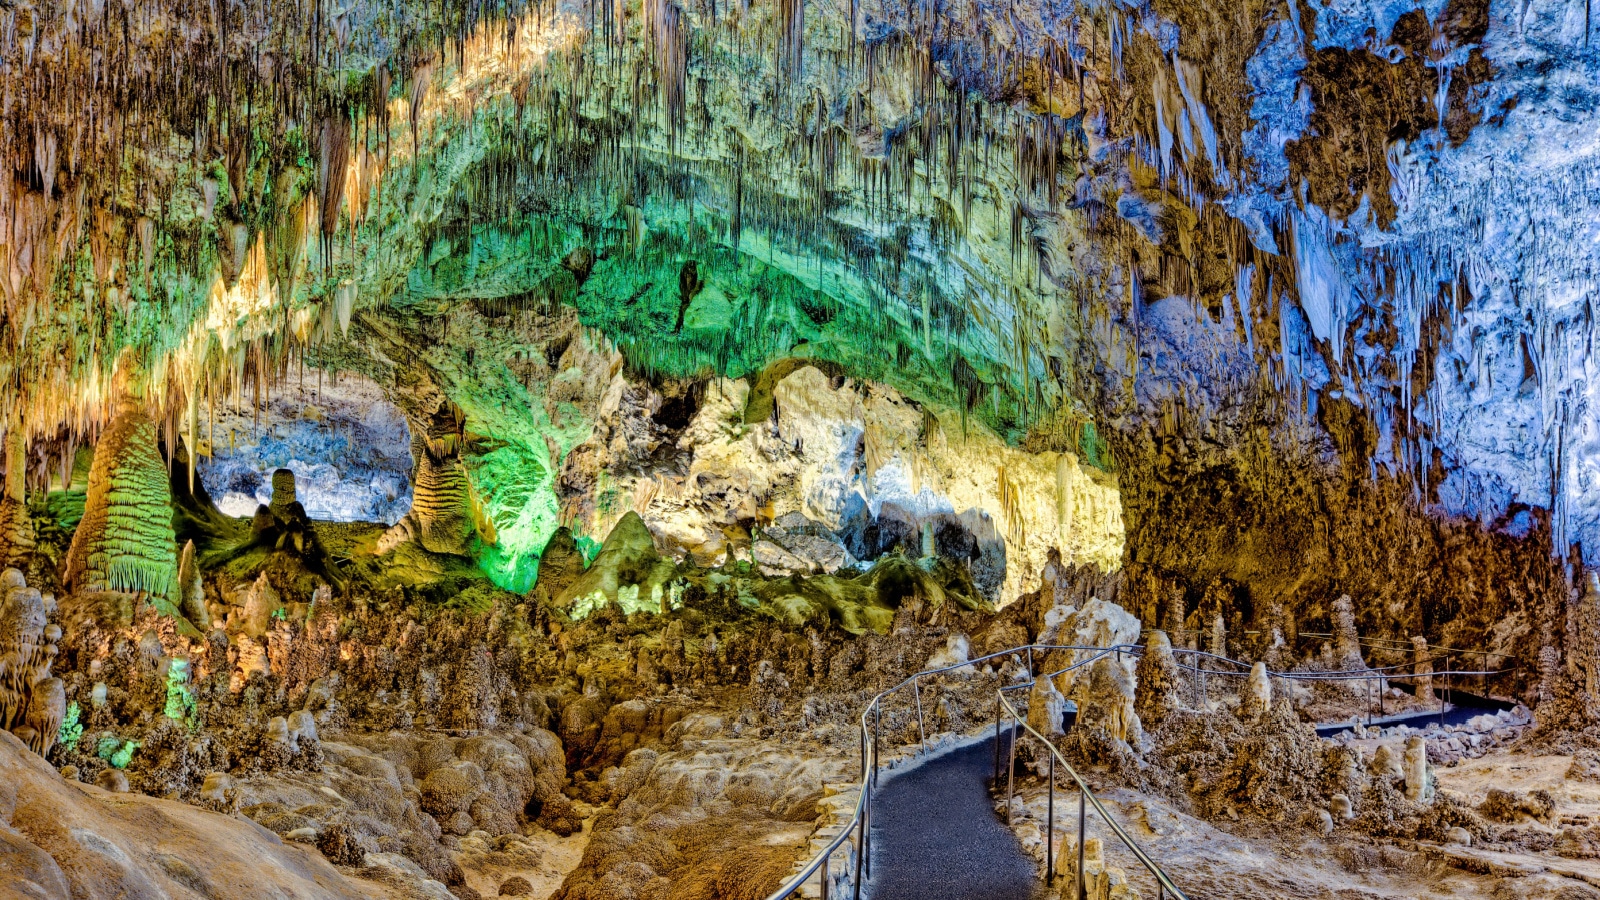 <p>Located in the Chihuahuan Desert, this park is home to a vast underground cave system with spectacular limestone formations and a famous bat flight at dusk.</p>